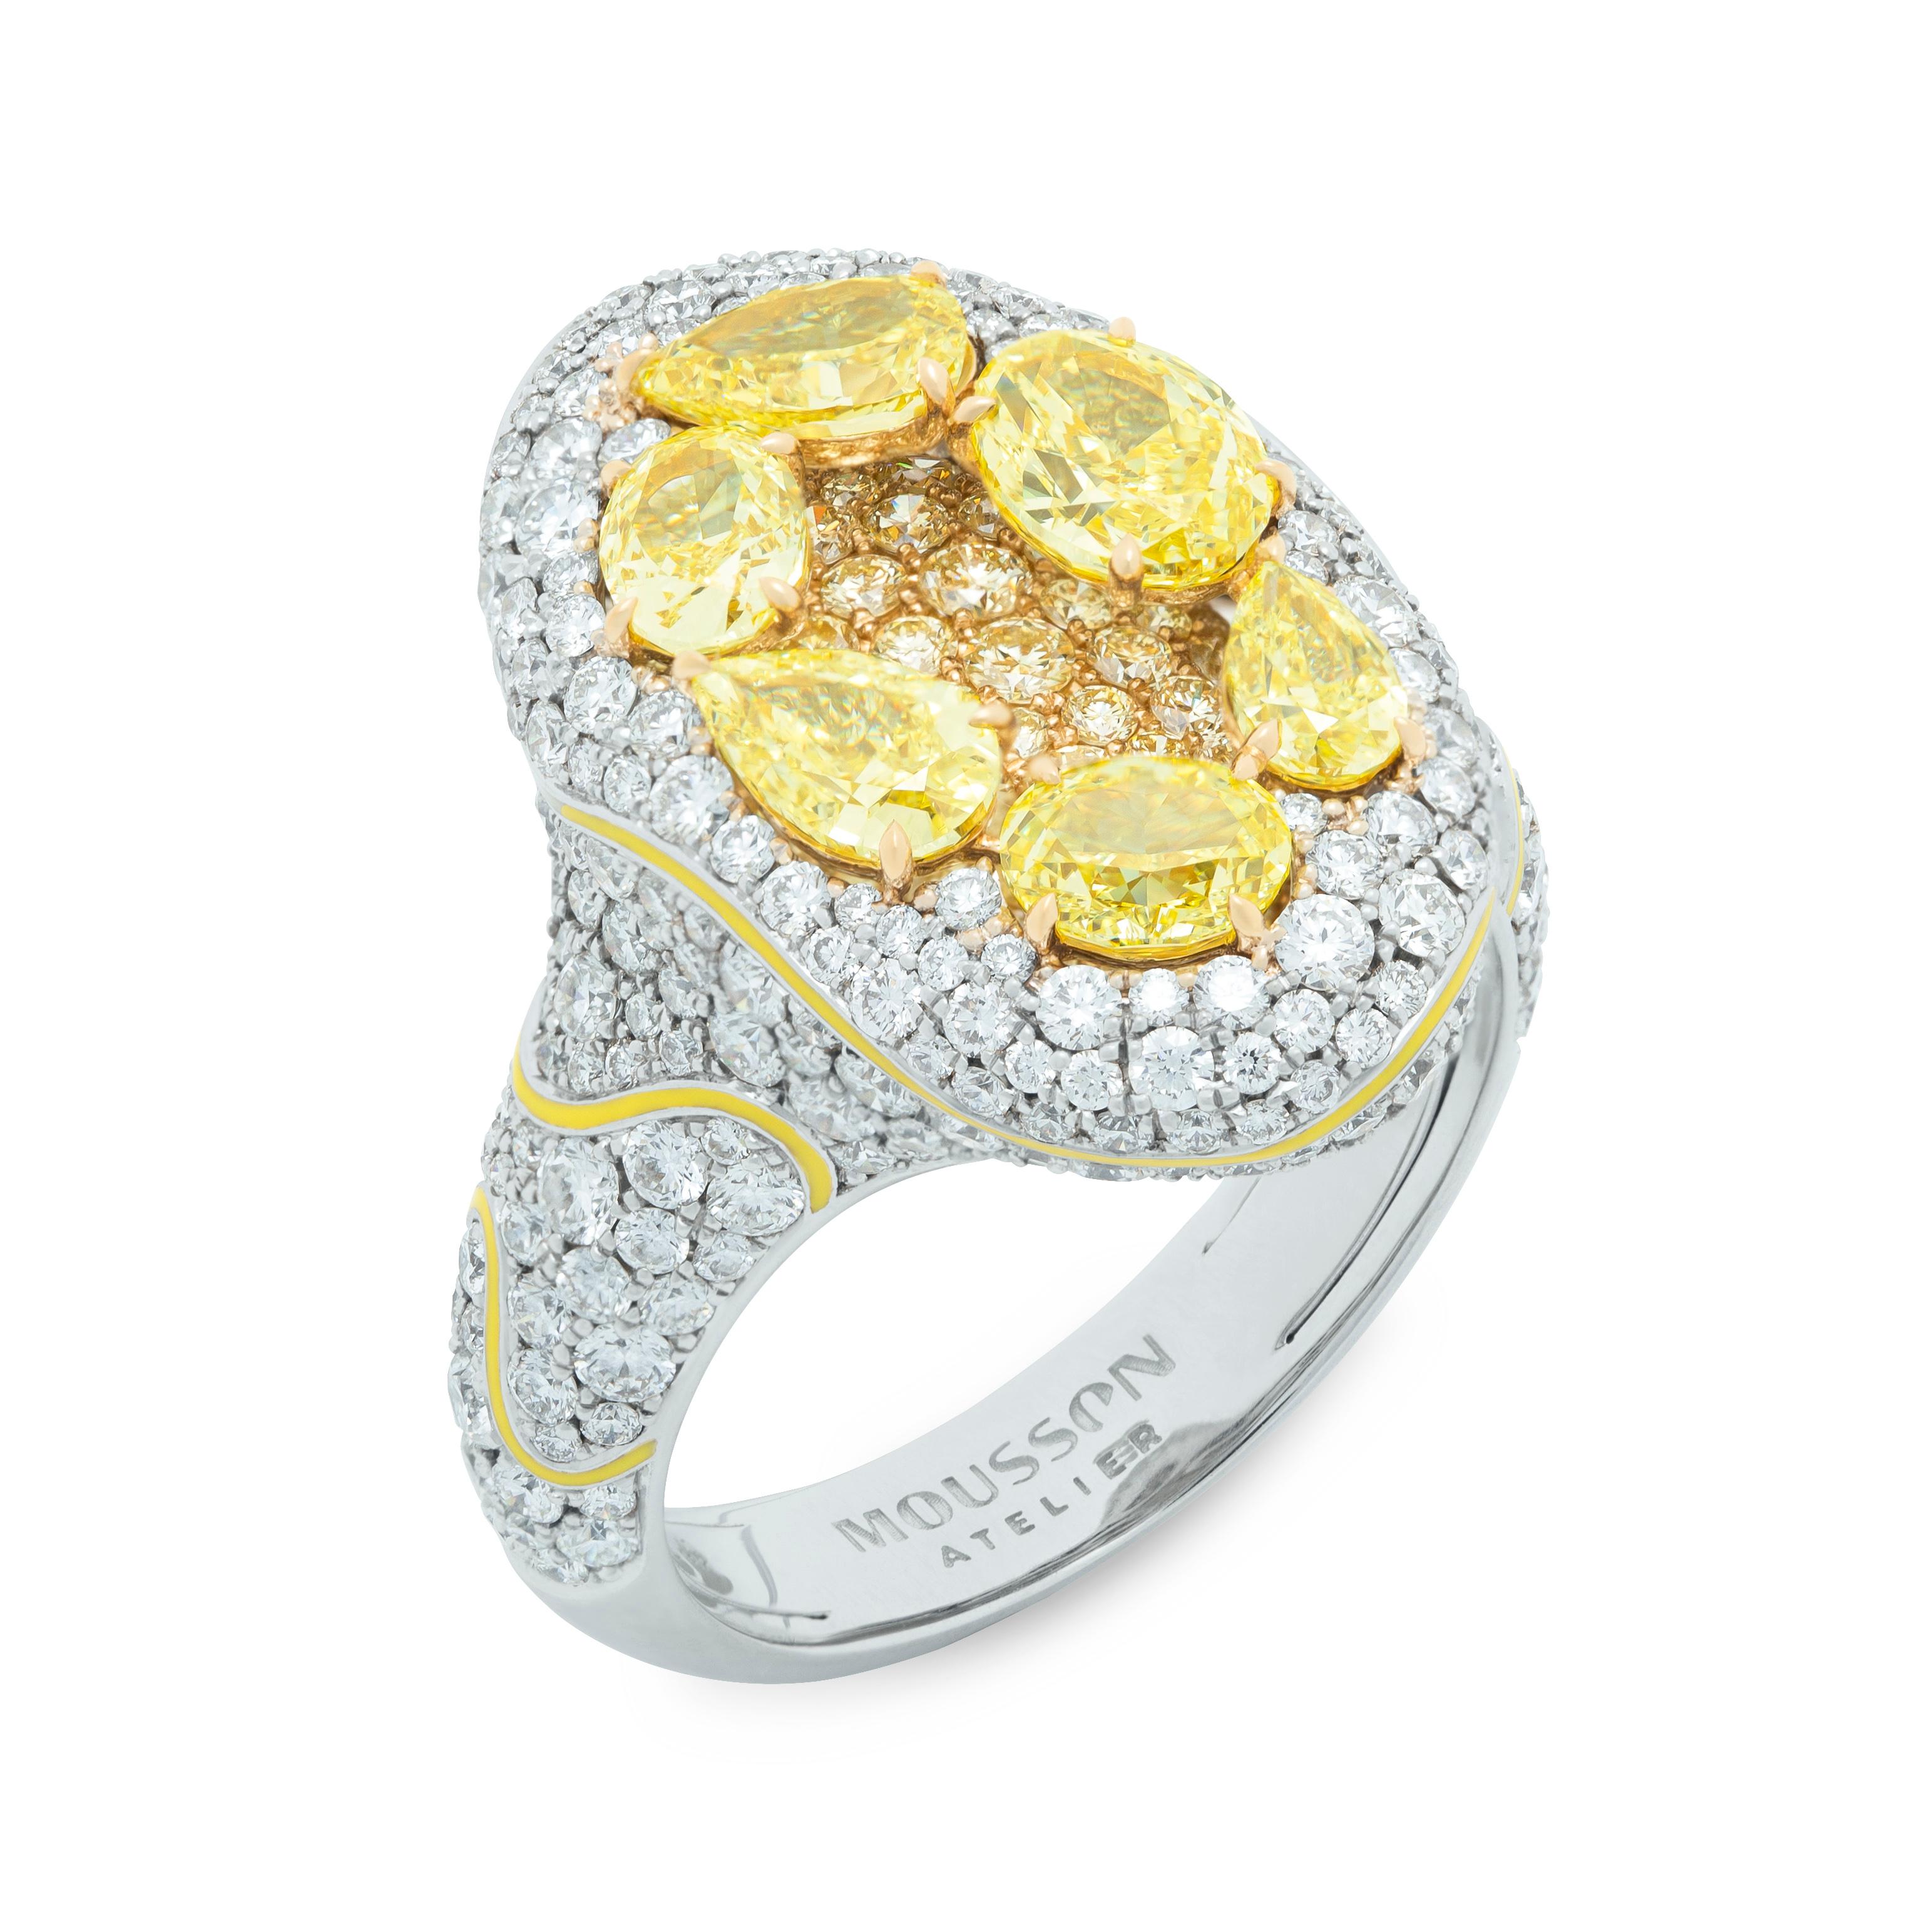 Yellow Diamonds White Diamonds Enamel 18 Karat White  and Yellow Gold High Jewelry Ring

This beautiful ring featuring a 6 Pear and Oval shape Fancy Yellow Diamond center of 2.20 Carat, plus 73 small Yellow Diamonds, is set in 18K Yellow Gold and